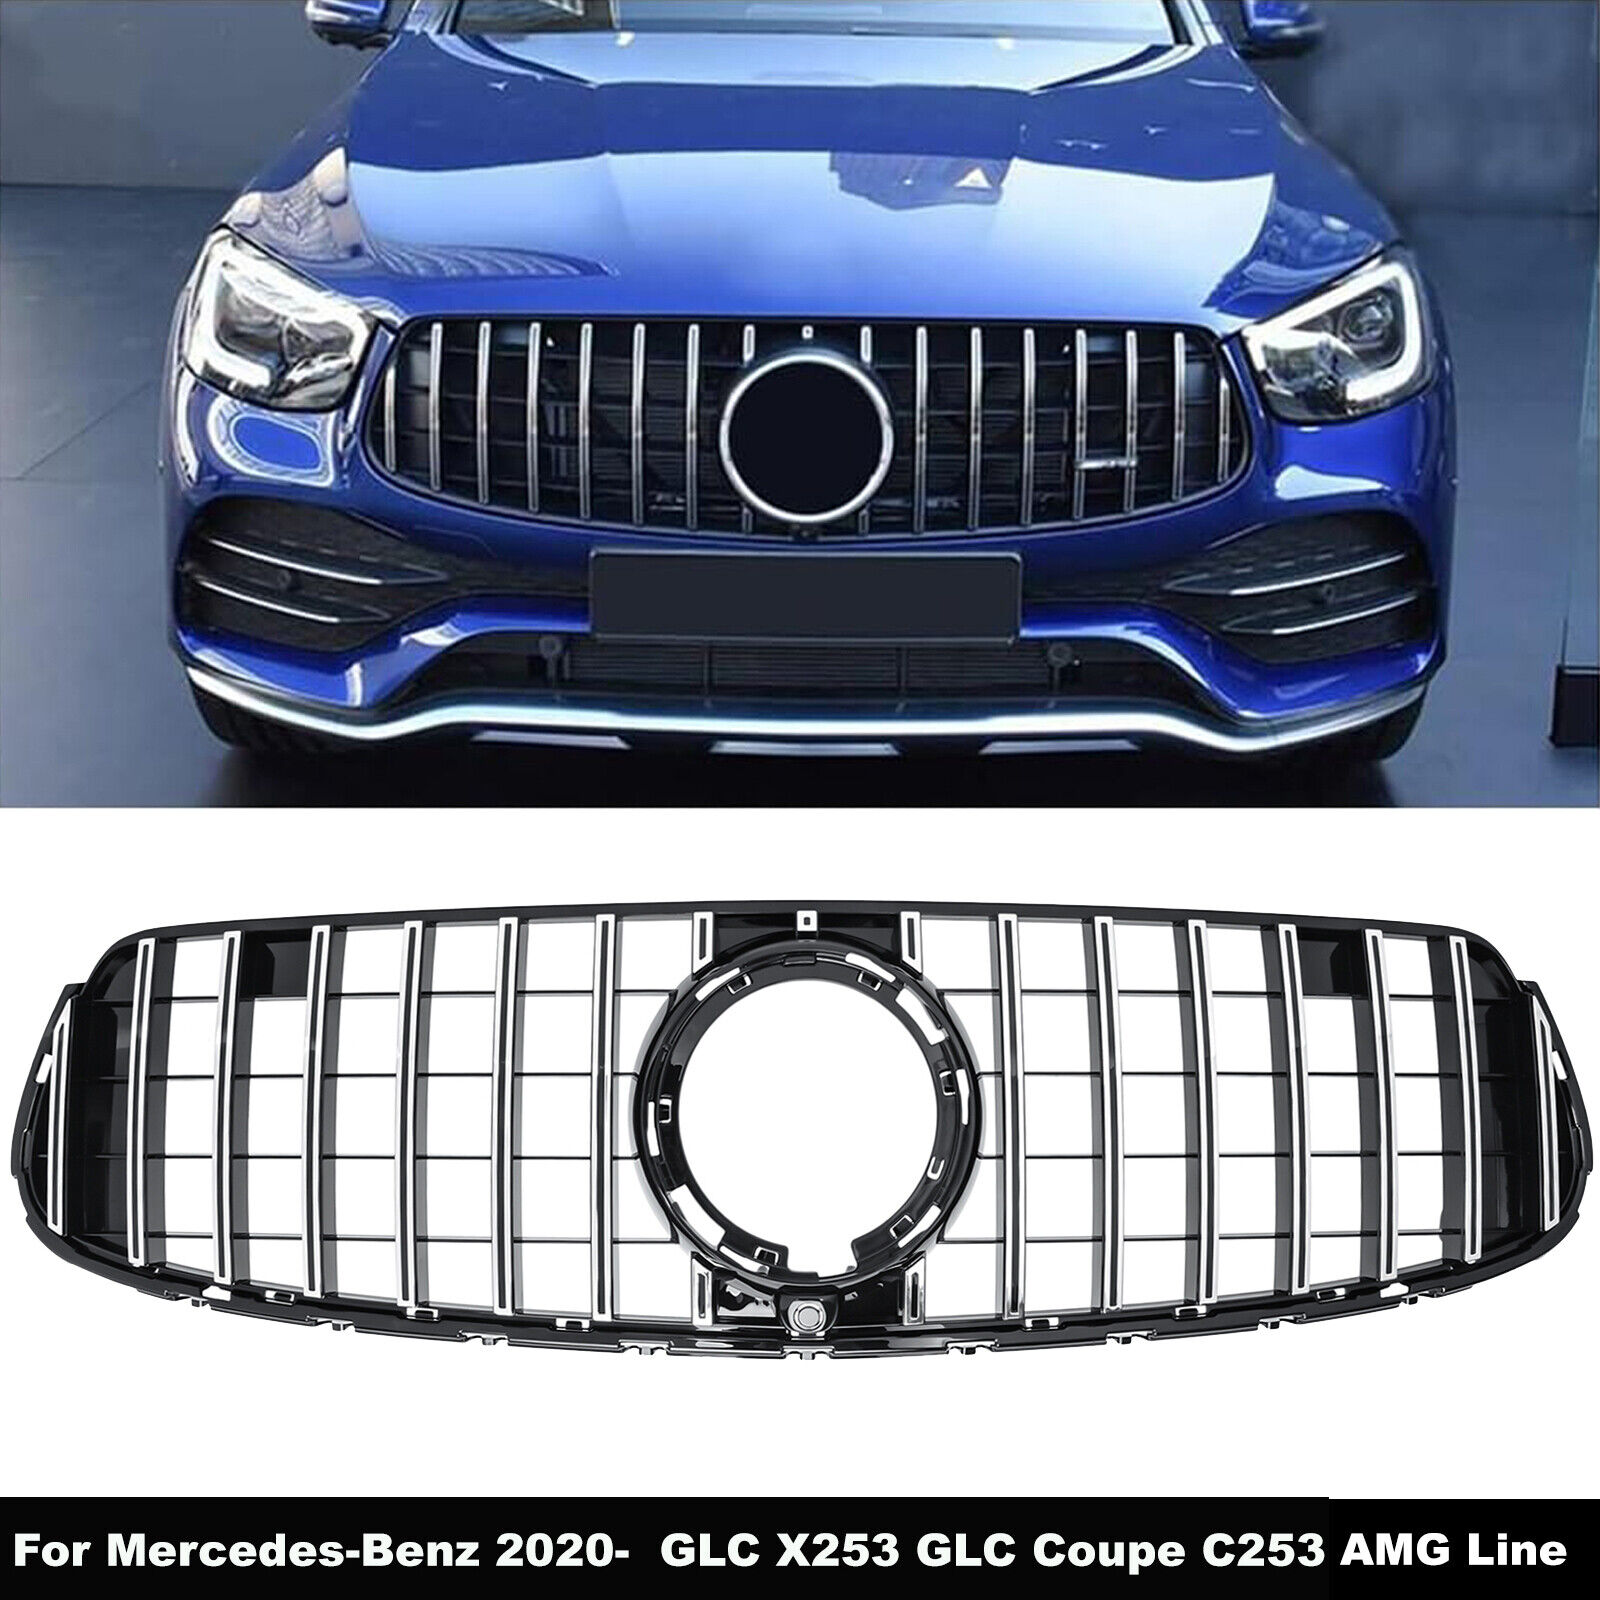 For 2020- Mercedes X253 GLC 200 300 350 400 with AMG Line Chrome GT Front Grille